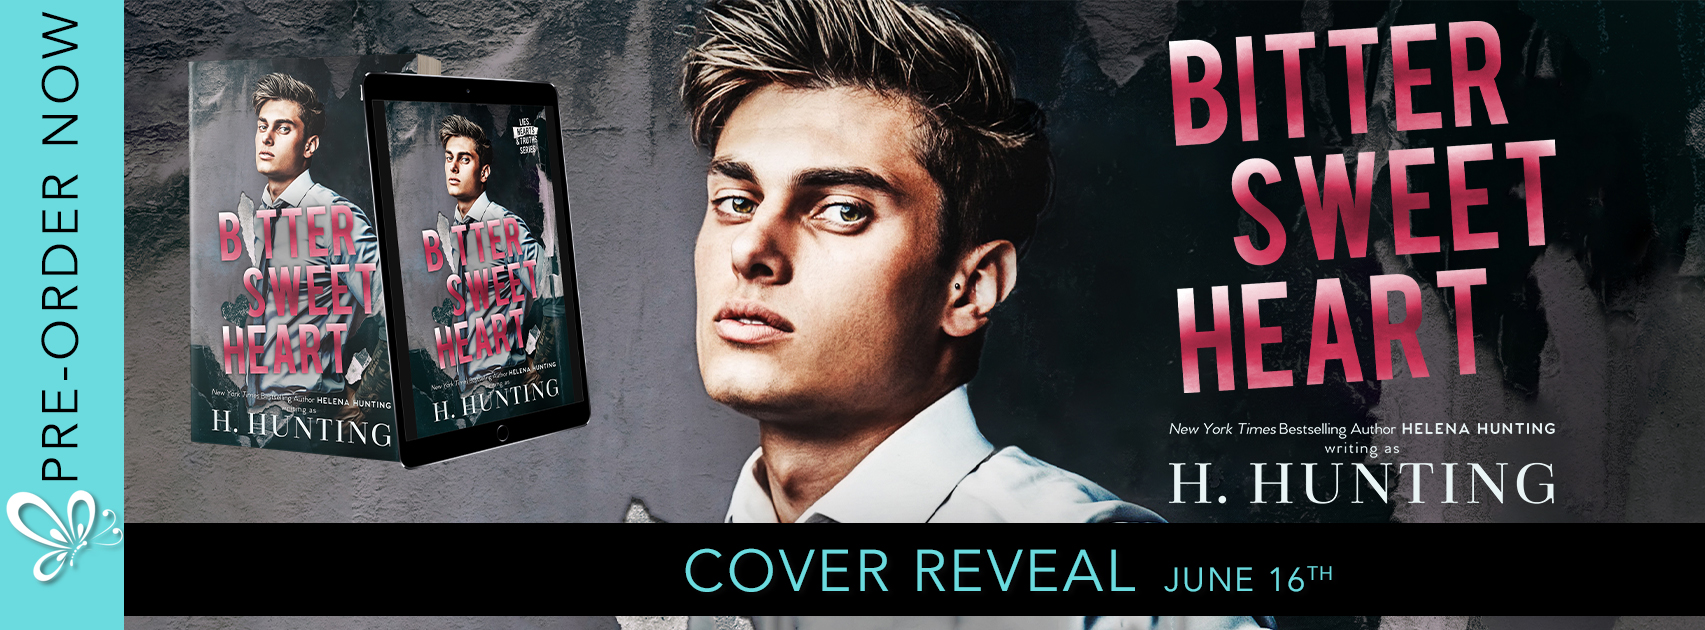 Bitter Sweet Heart by H. Hunting | Cover Reveal!